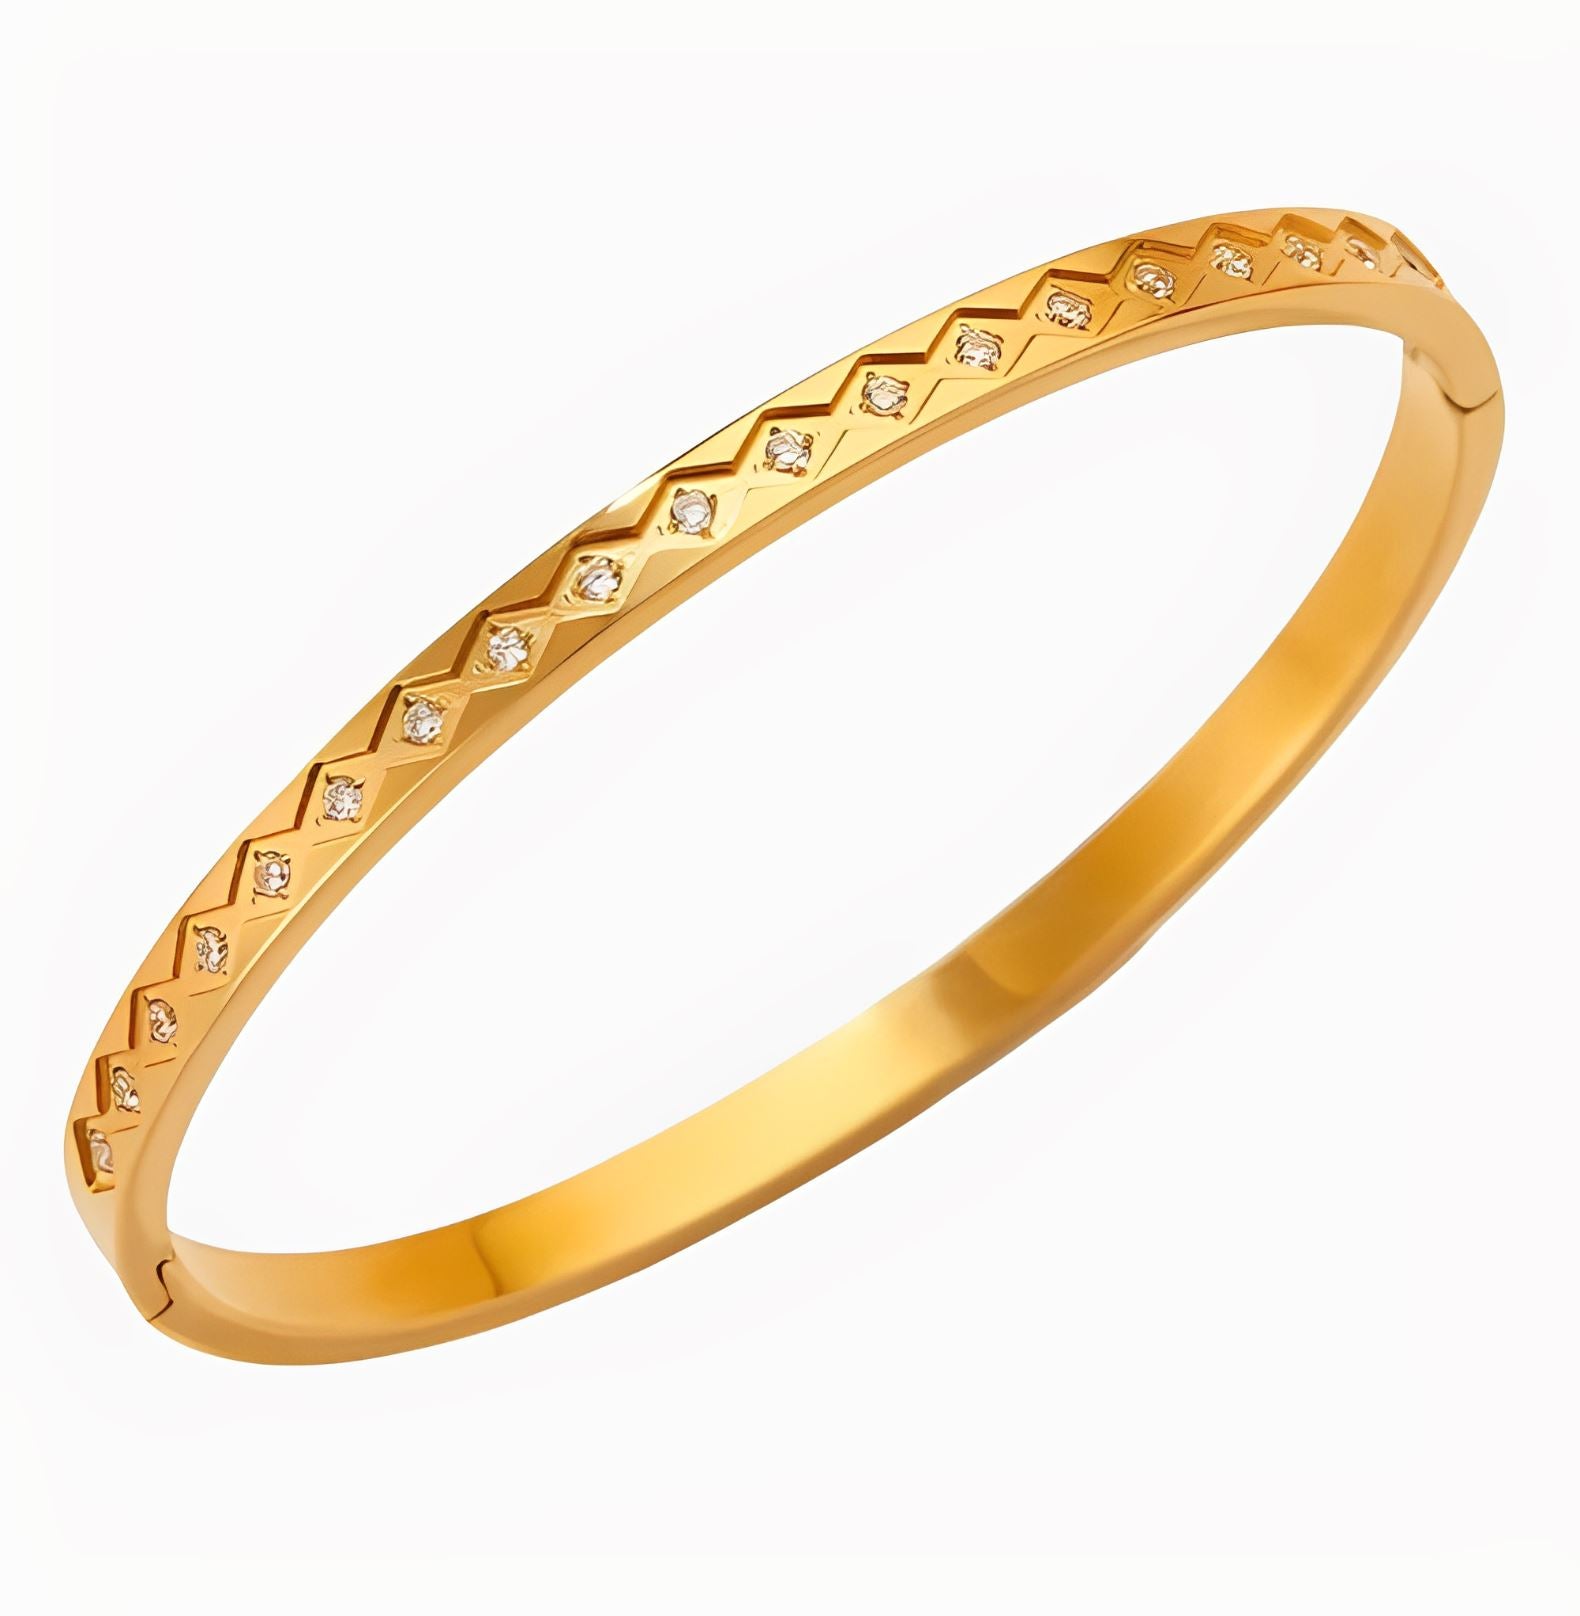 GEOMETRIC BANGLE BRACELET braclet Yubama Jewelry Online Store - The Elegant Designs of Gold and Silver ! 